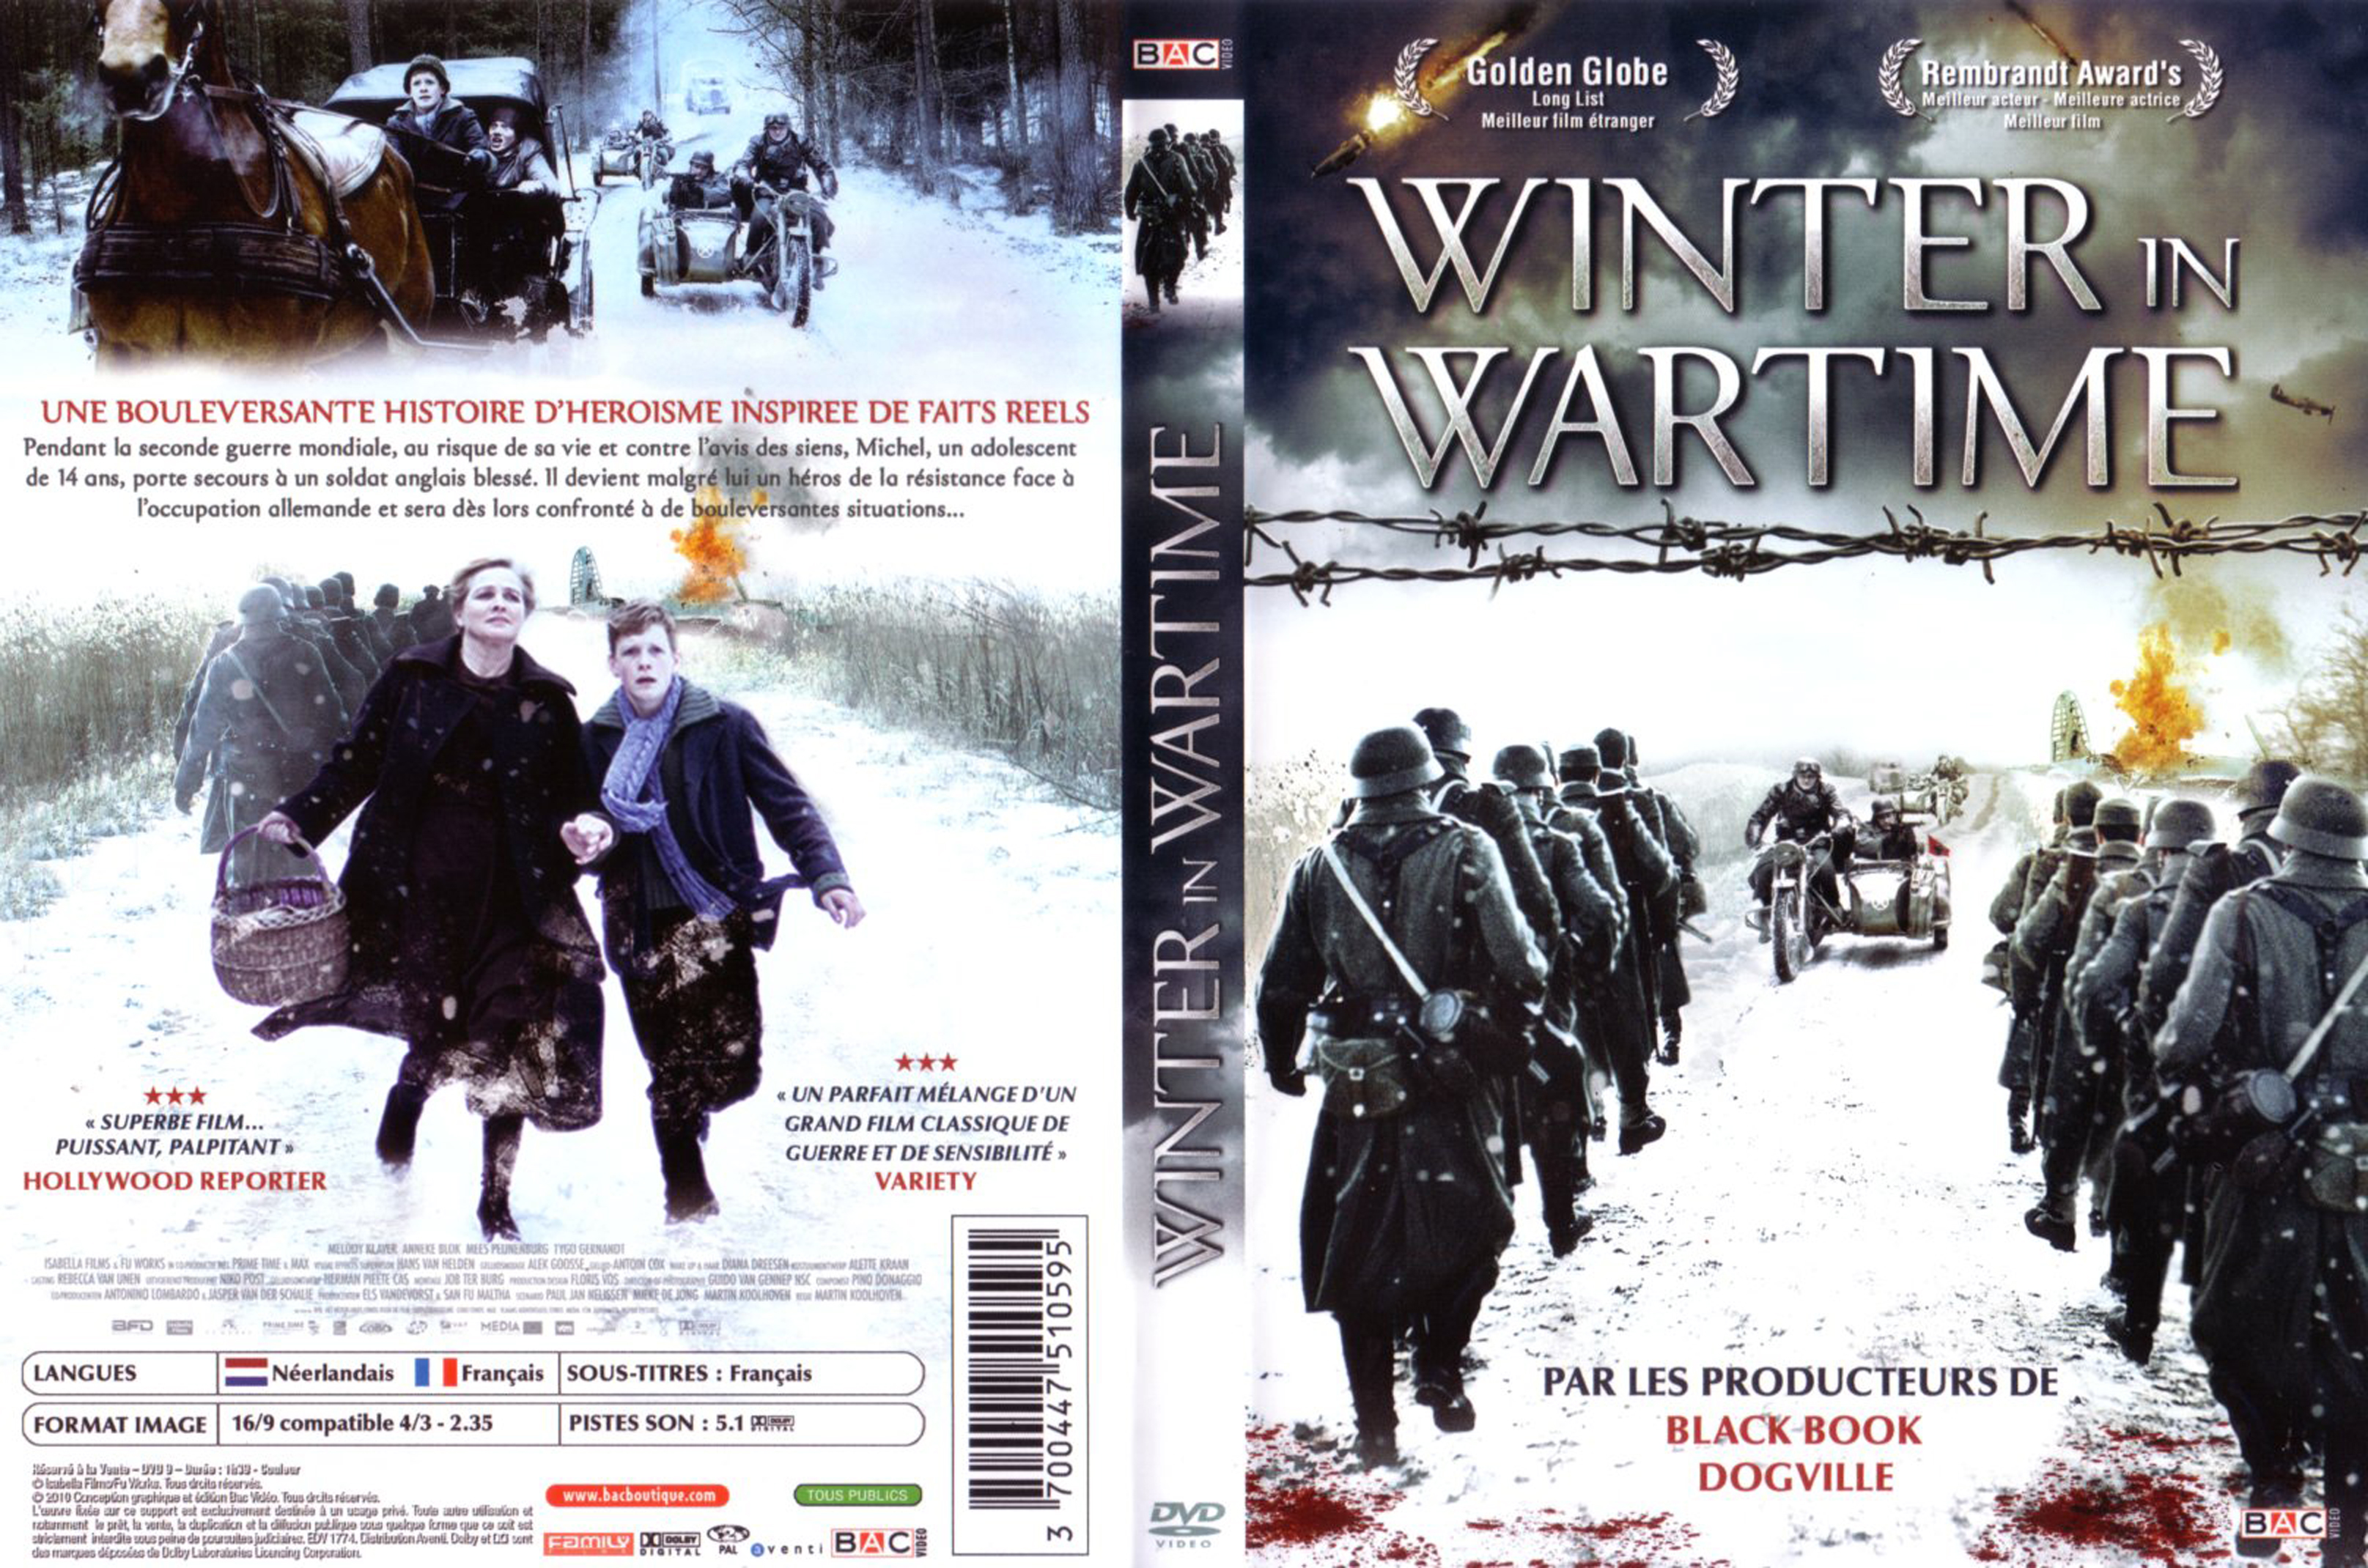 Jaquette DVD Winter in wartime